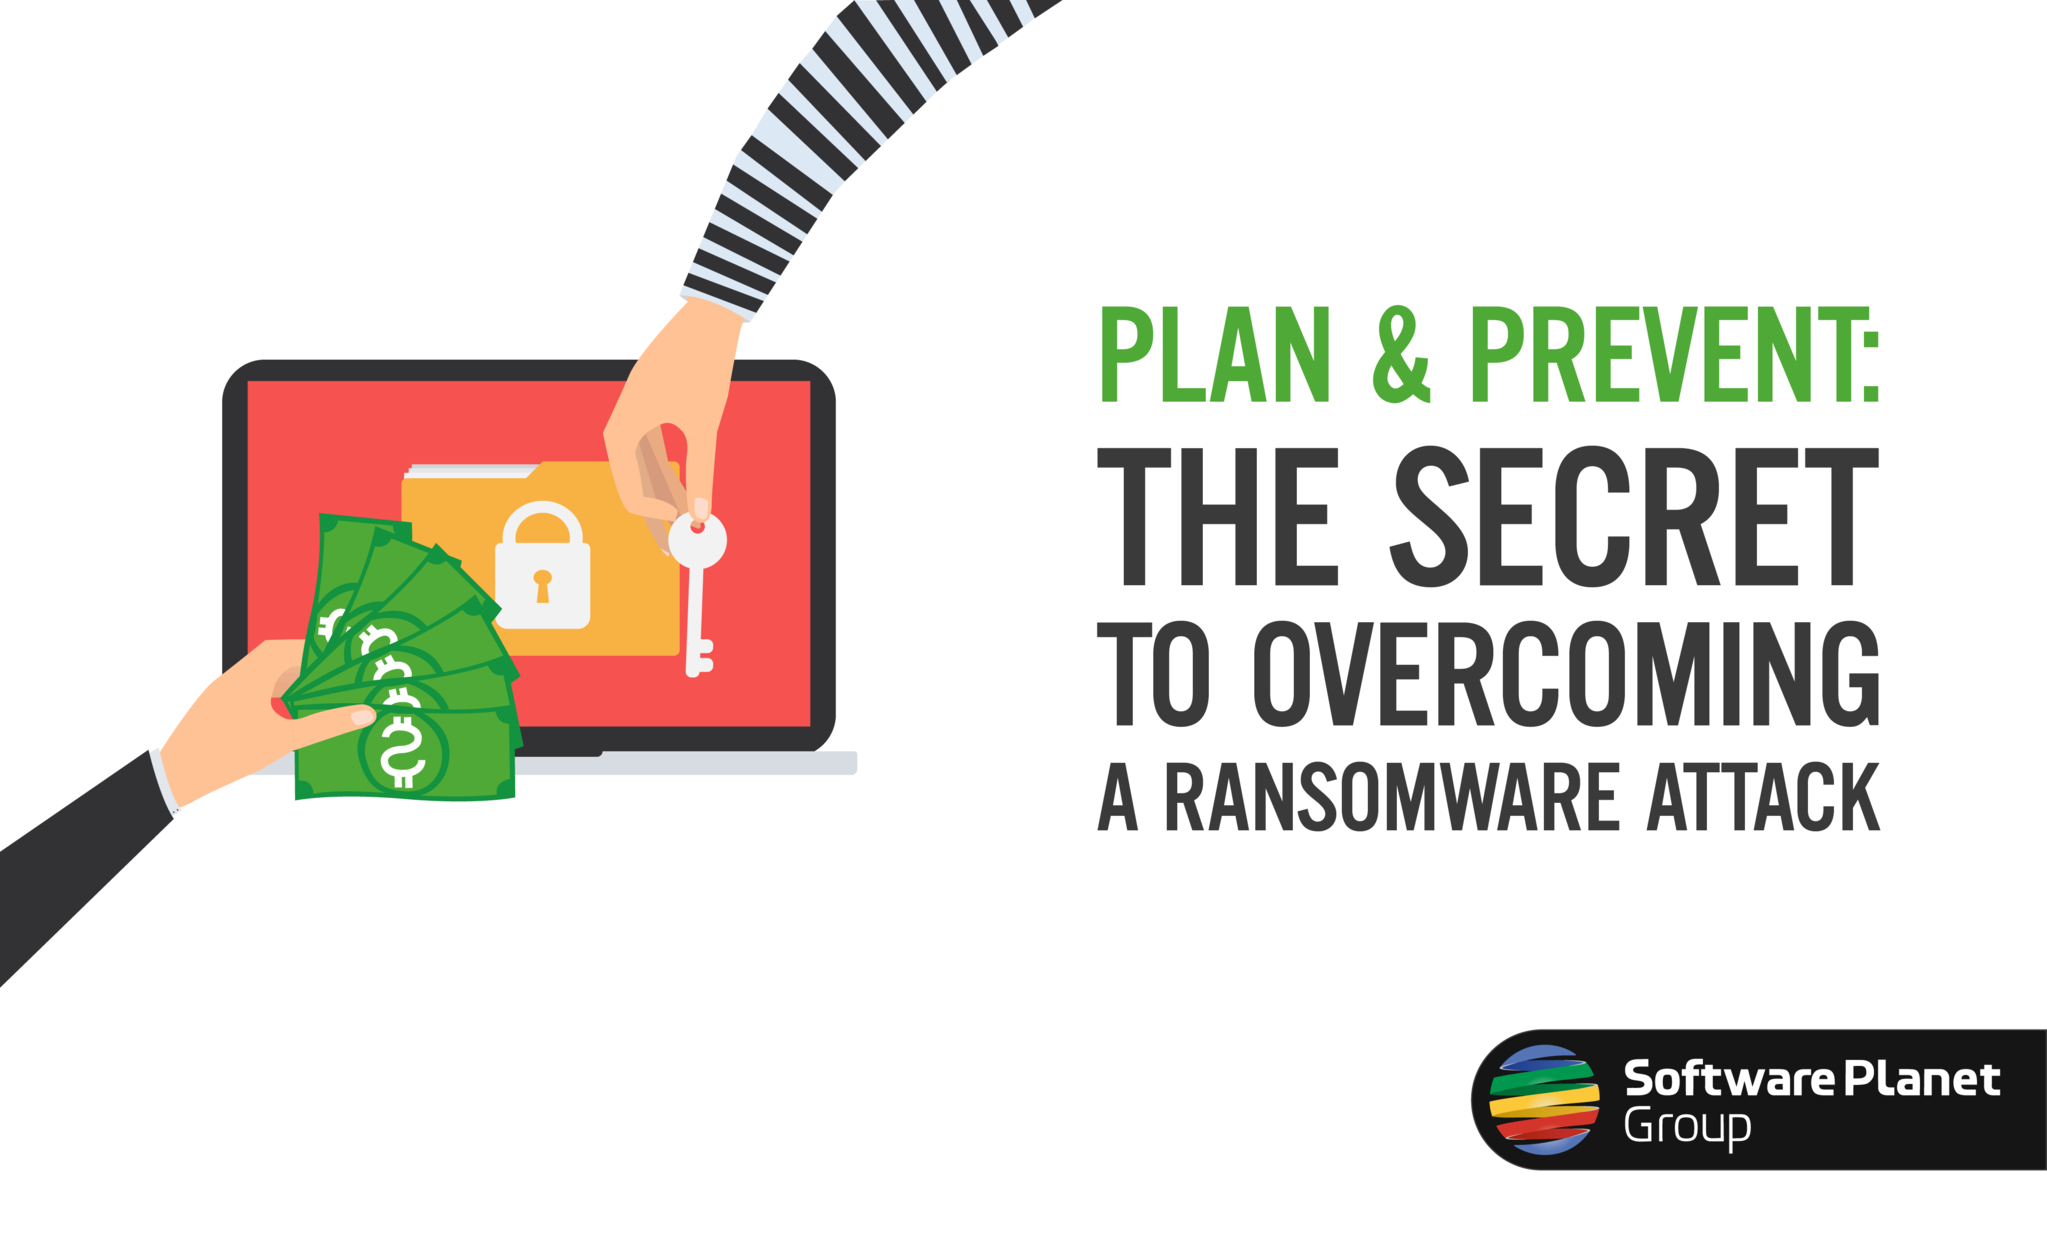 Plan & Prevent: The Secret to Overcoming a Ransomware Attack